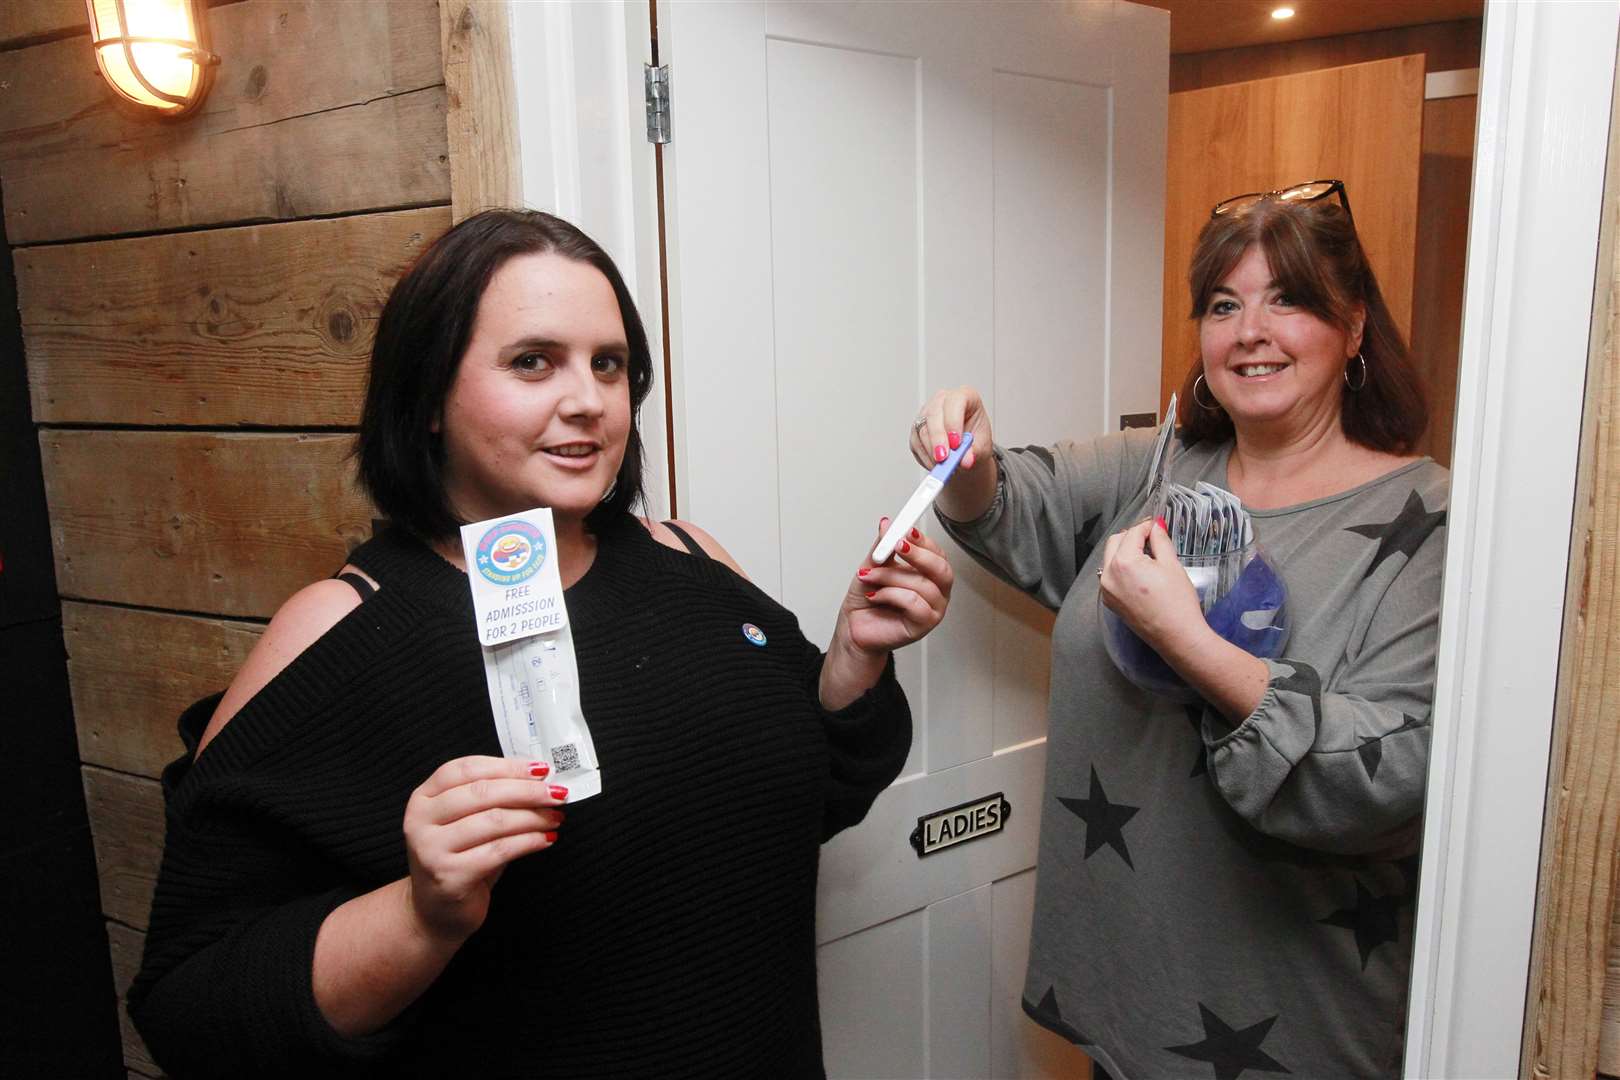 From left, Sara Frost, volunteer and Sharon Jackson, Organiser, outside the toilets in the Moondance Bar Rochester promoting pregnancy testing kits at the launch of their free pregnancy testing campaign. Picture: John Westhrop.. (16329539)